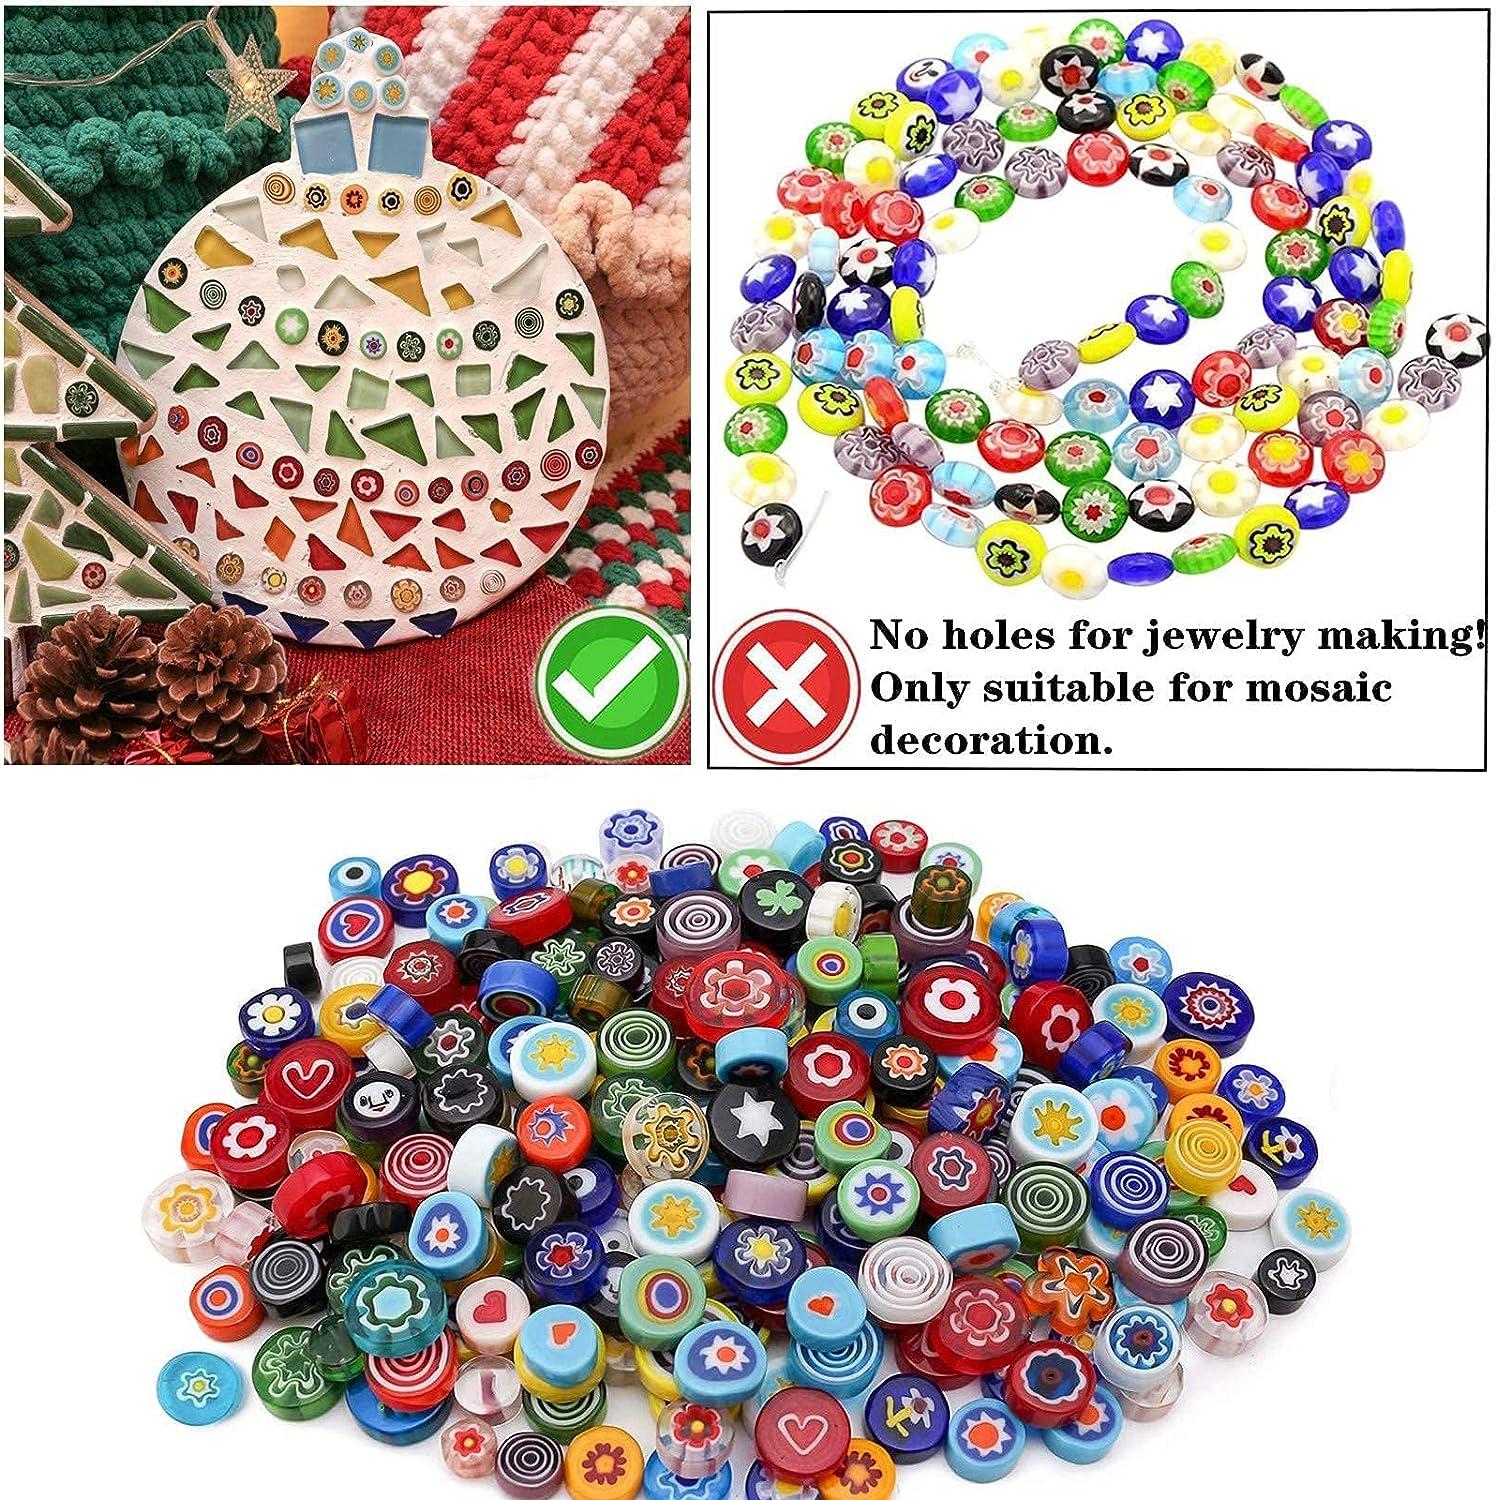 Mosaic Craft Kits for Adults, Heart Ornament, Mosaic Kit, Diy Kits for  Adults, Craft Kits for Women, Personalized Christmas Crafts, Diy Kit 